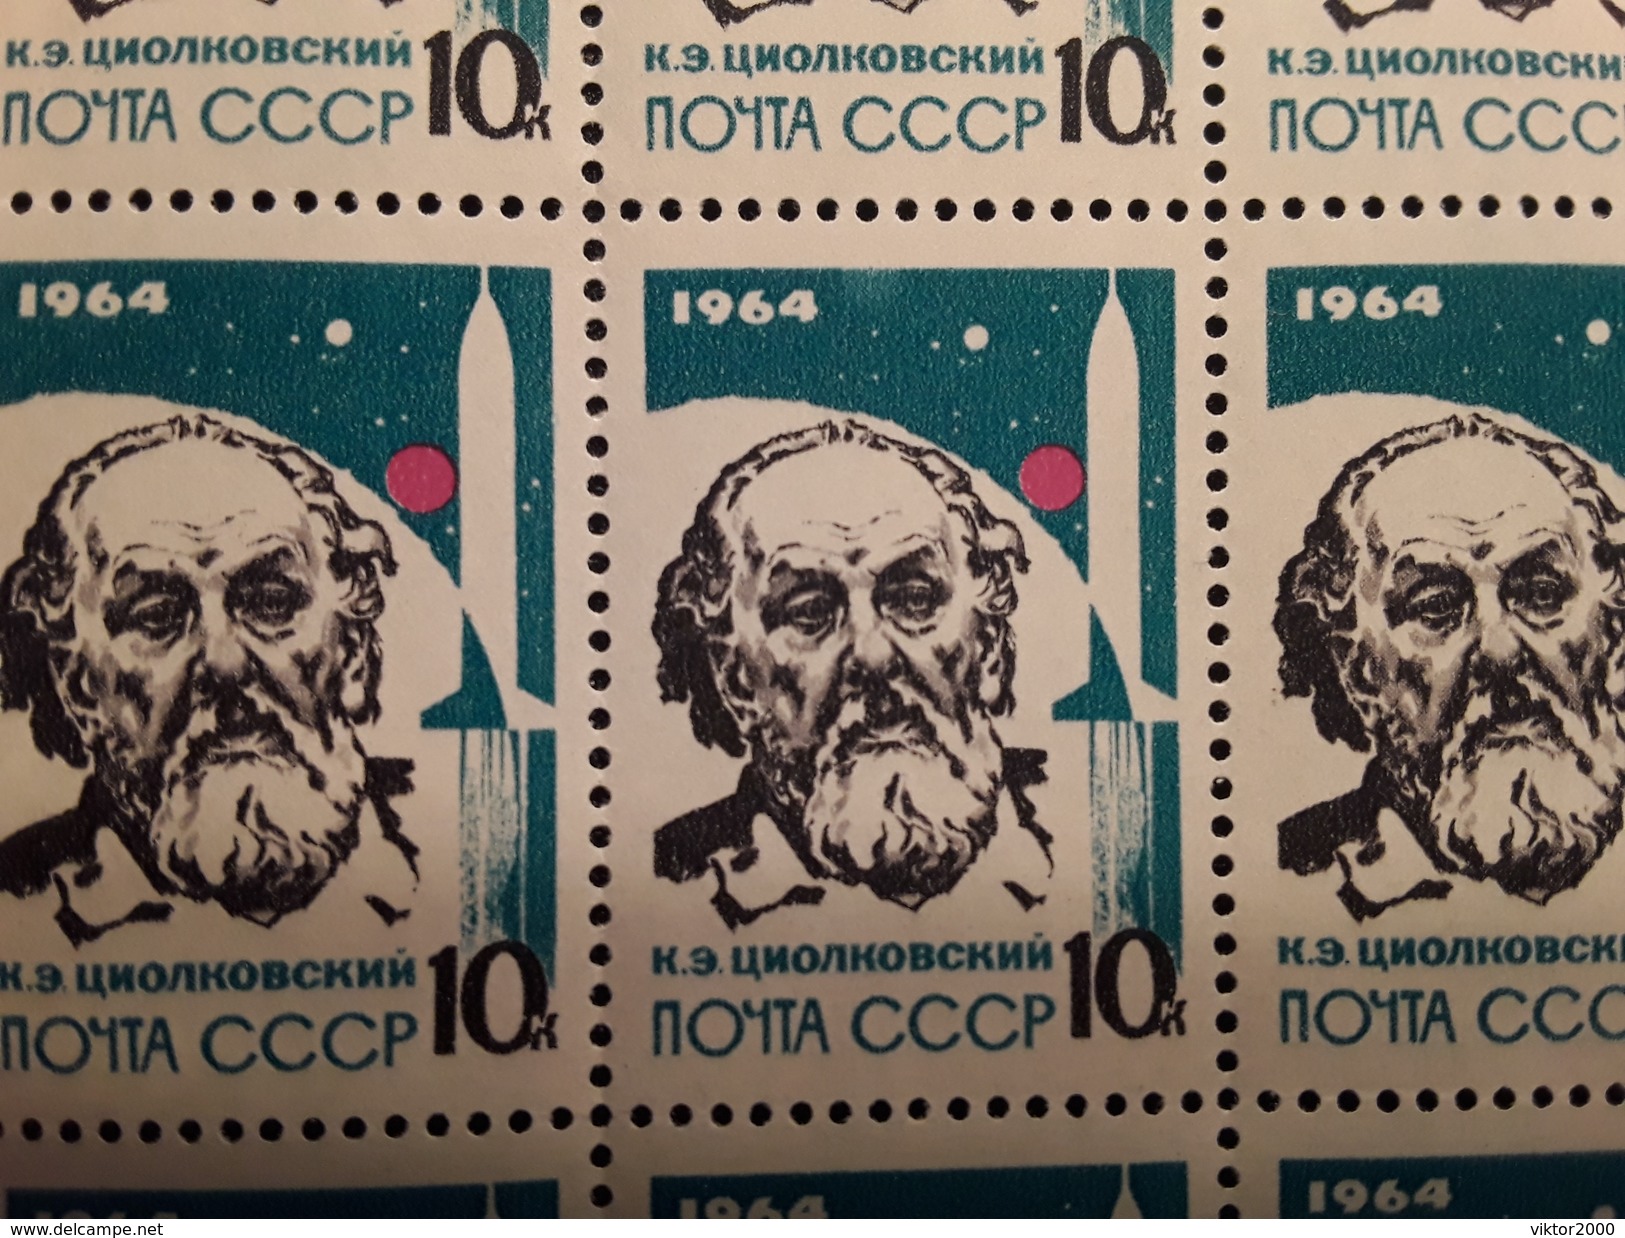 RUSSIA 1964 MNH (**)MICHEL 2900 The Founder Of Rocketry.Tsiolkovsky - Feuilles Complètes